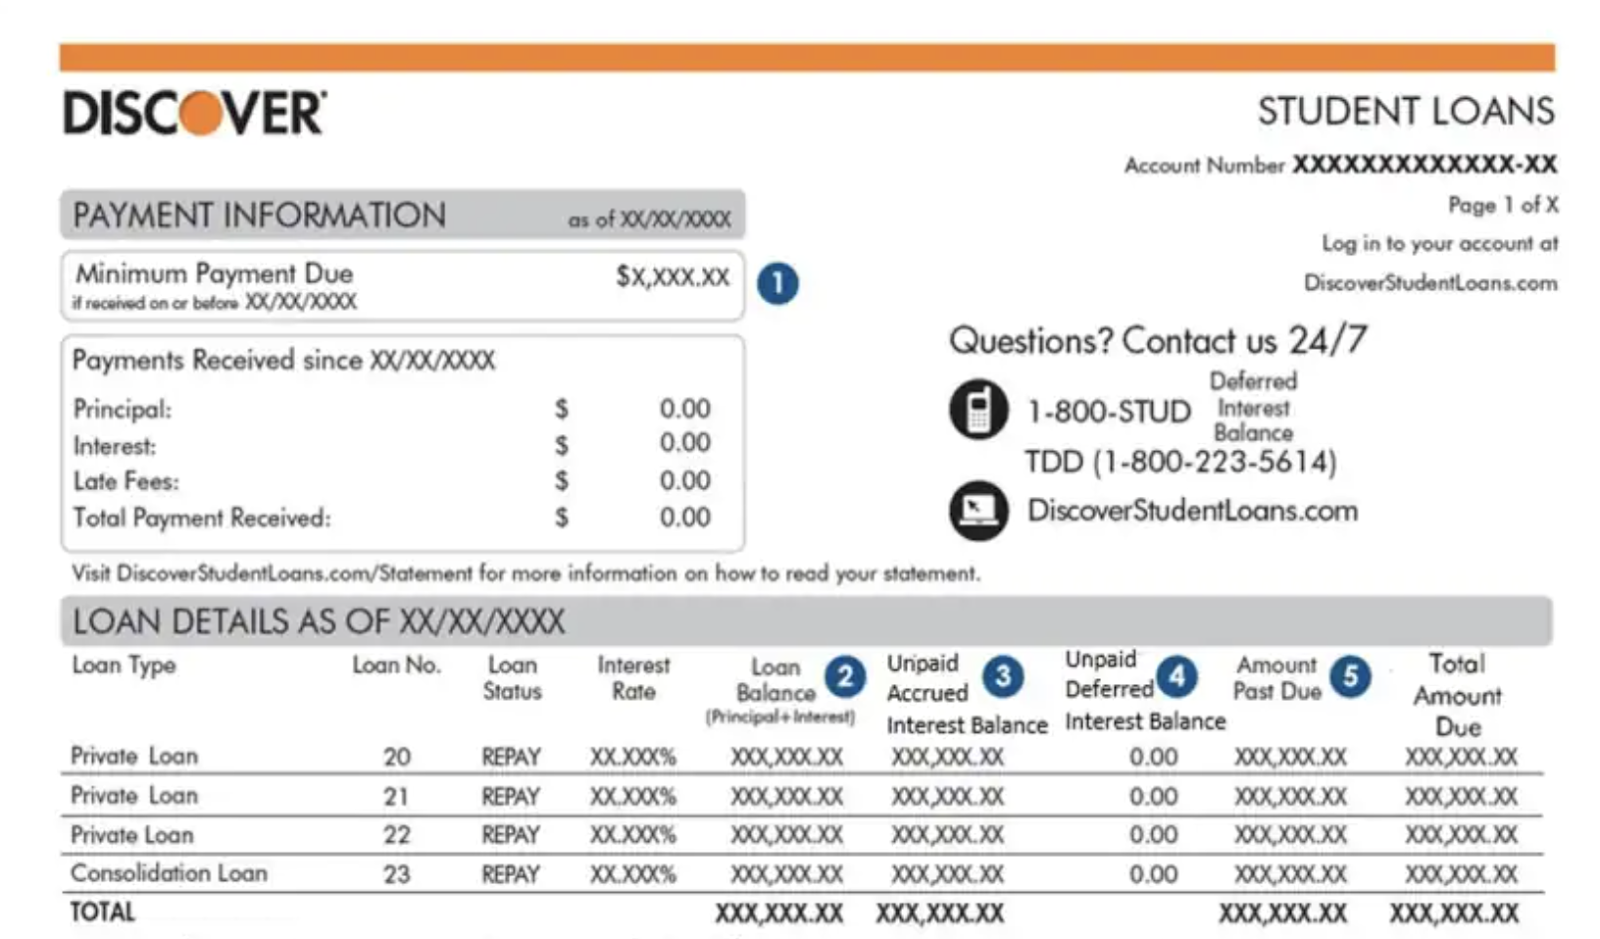 A screenshot showing an example of a student loan statement from Discover.